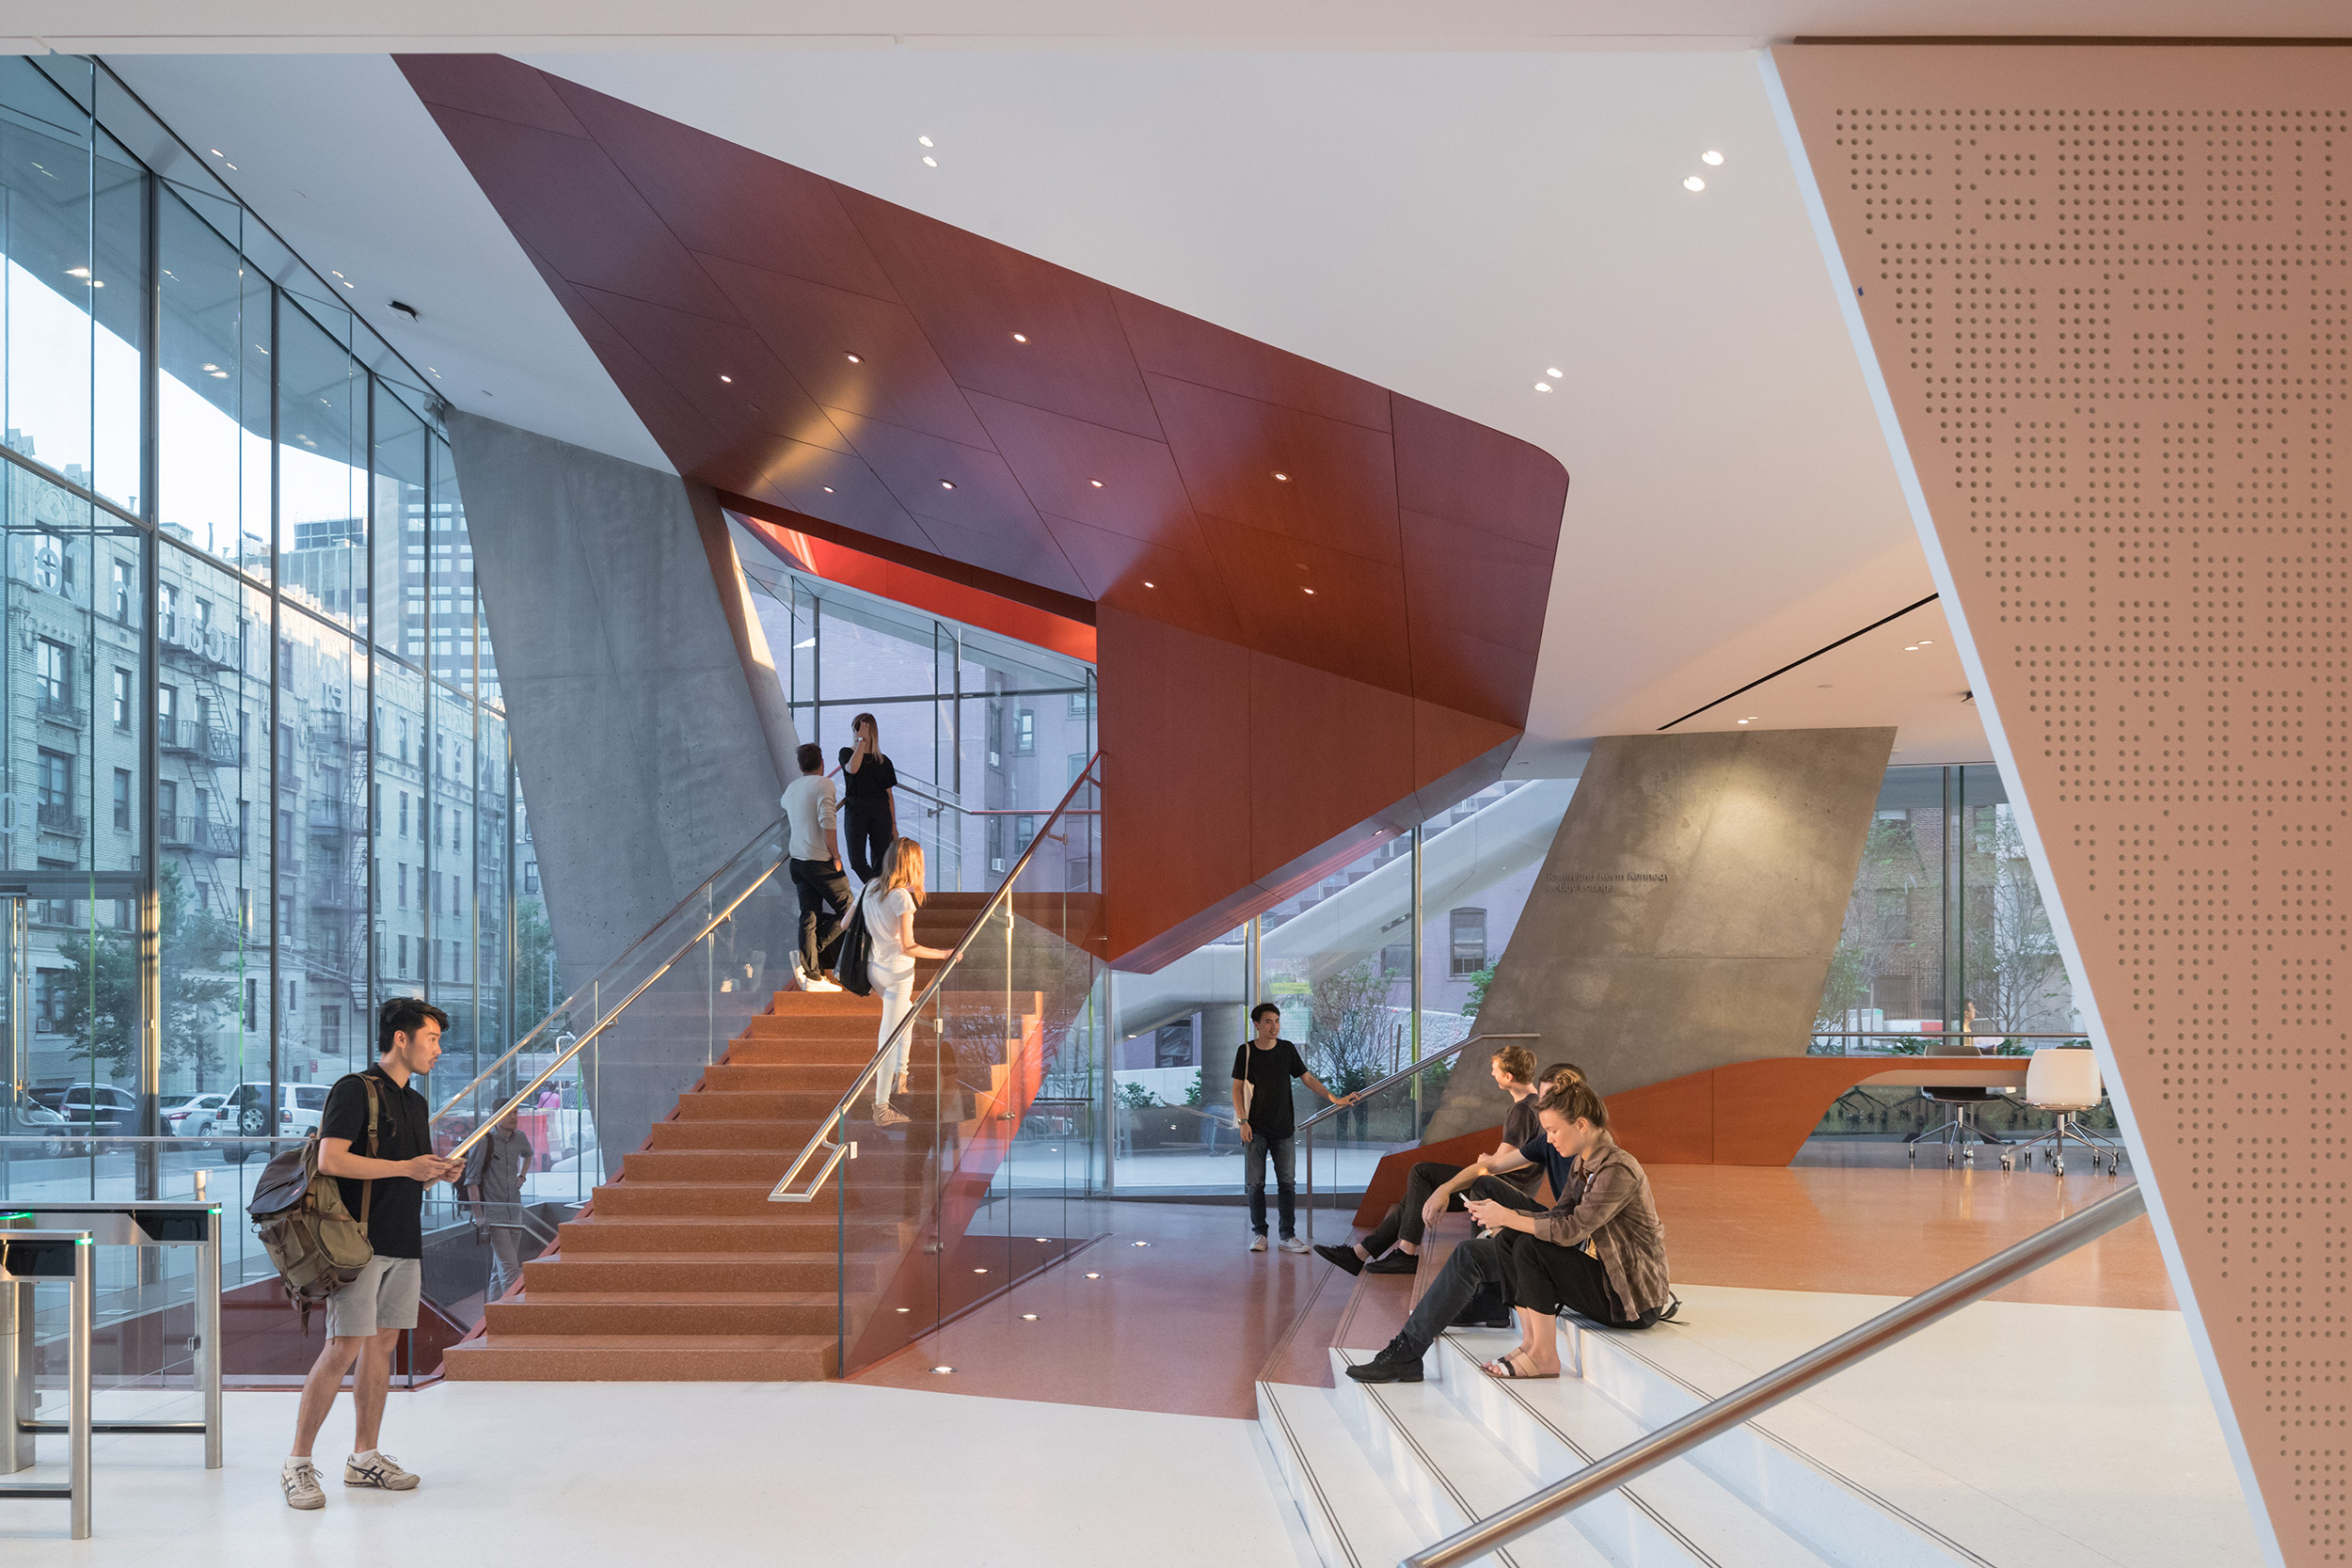 Project: The Roy and Diana Vagelos Education Center. Architect: Diller Scofidio + Renfro. Executive Architect: Gensler. Landscape Architect: SCAPE. Photo: Iwan Baan.